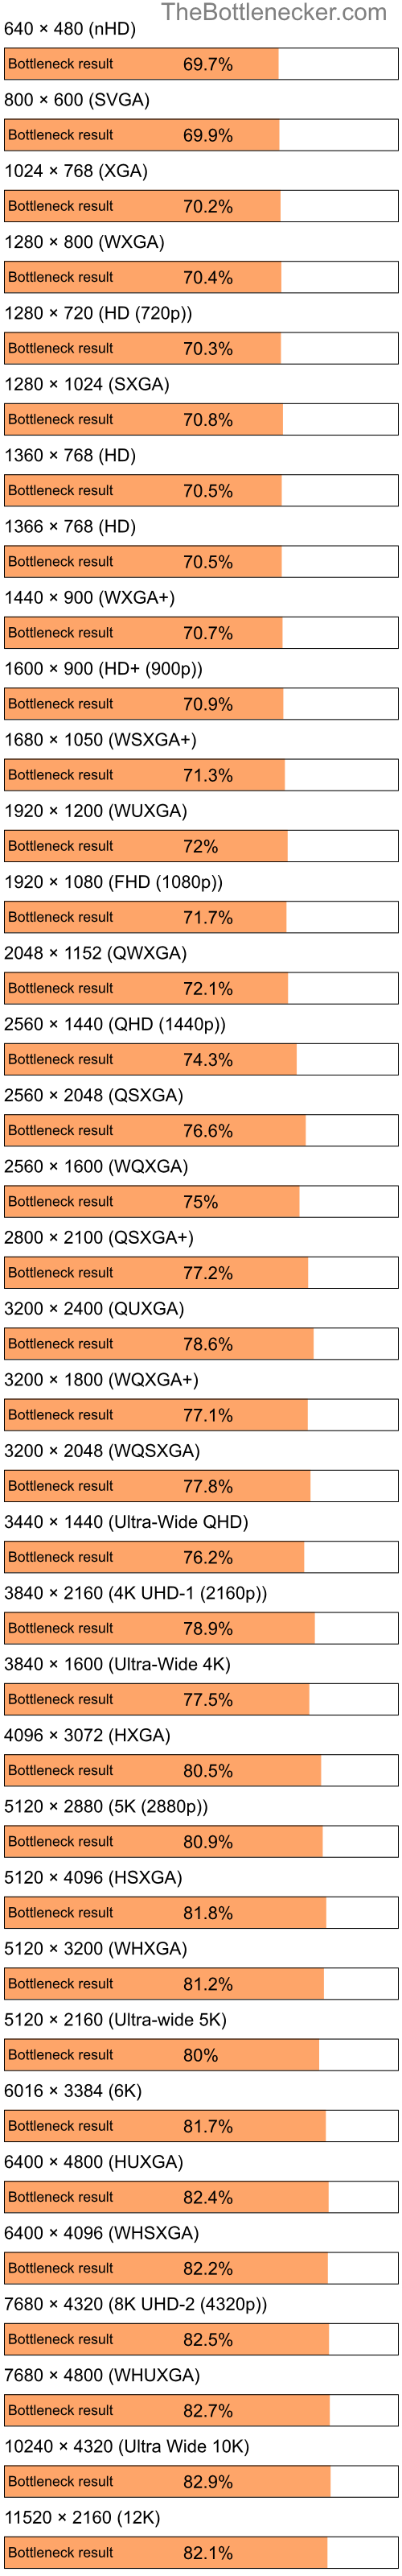 Bottleneck results by resolution for Intel Atom Z520 and AMD Mobility Radeon HD 4250 in Graphic Card Intense Tasks